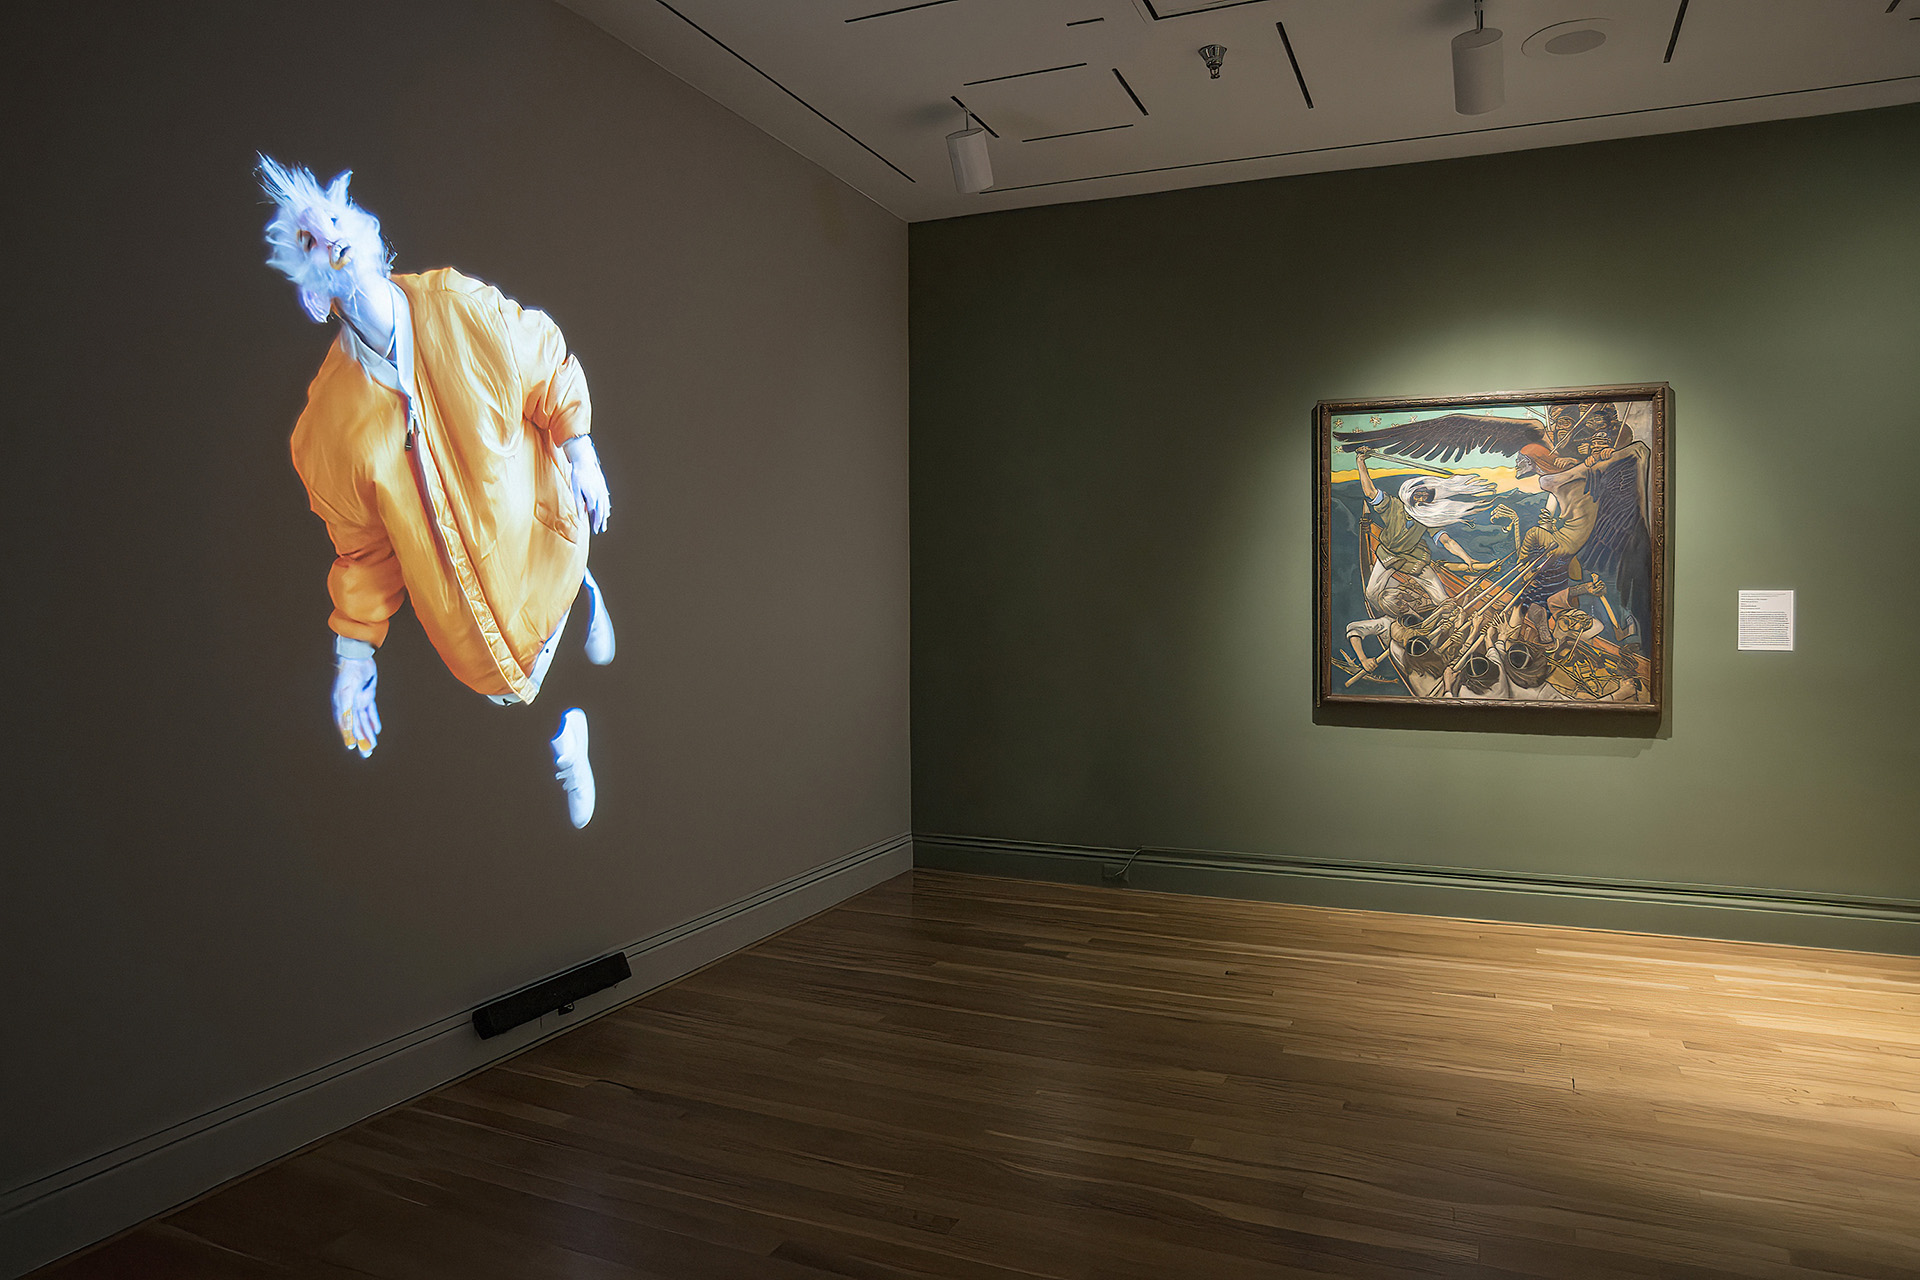 installation view with video projection and painting